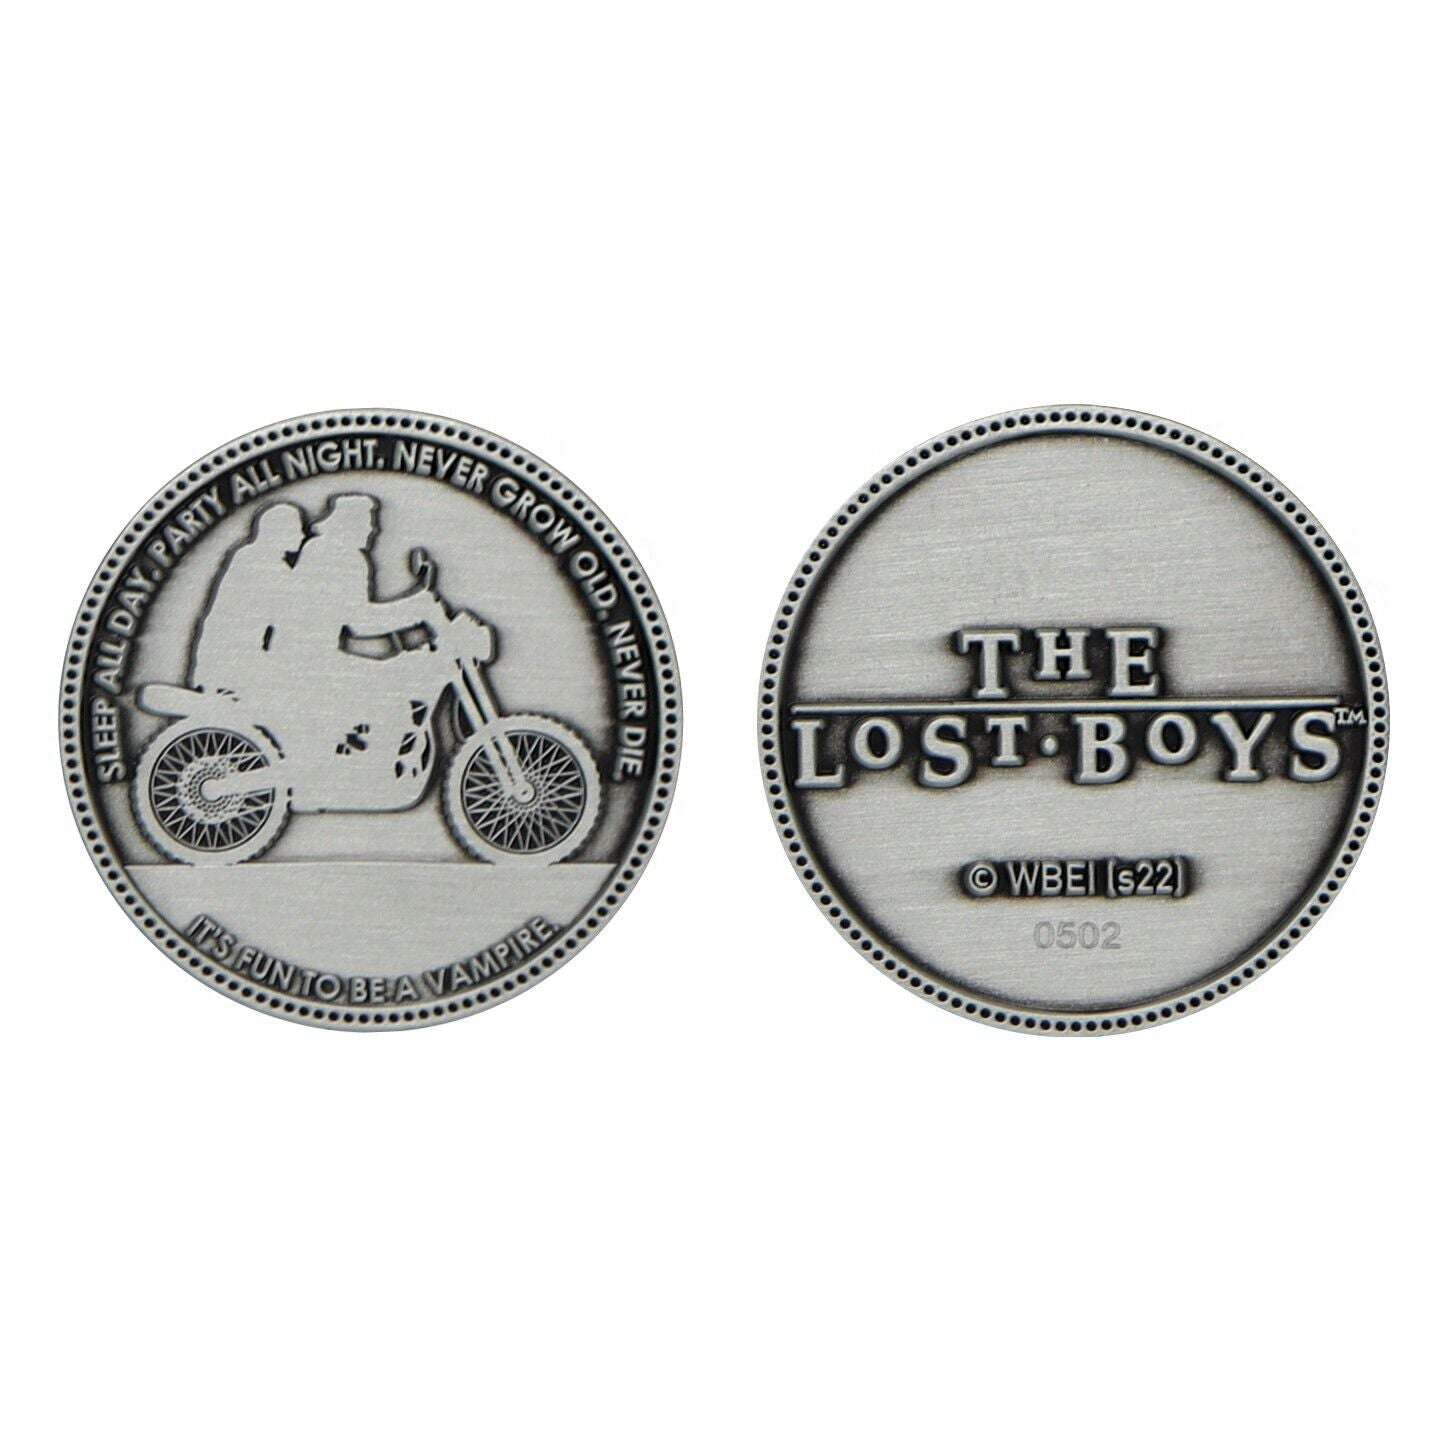 The Lost Boys Limited Edition Horror Collectable Coin Fanattik